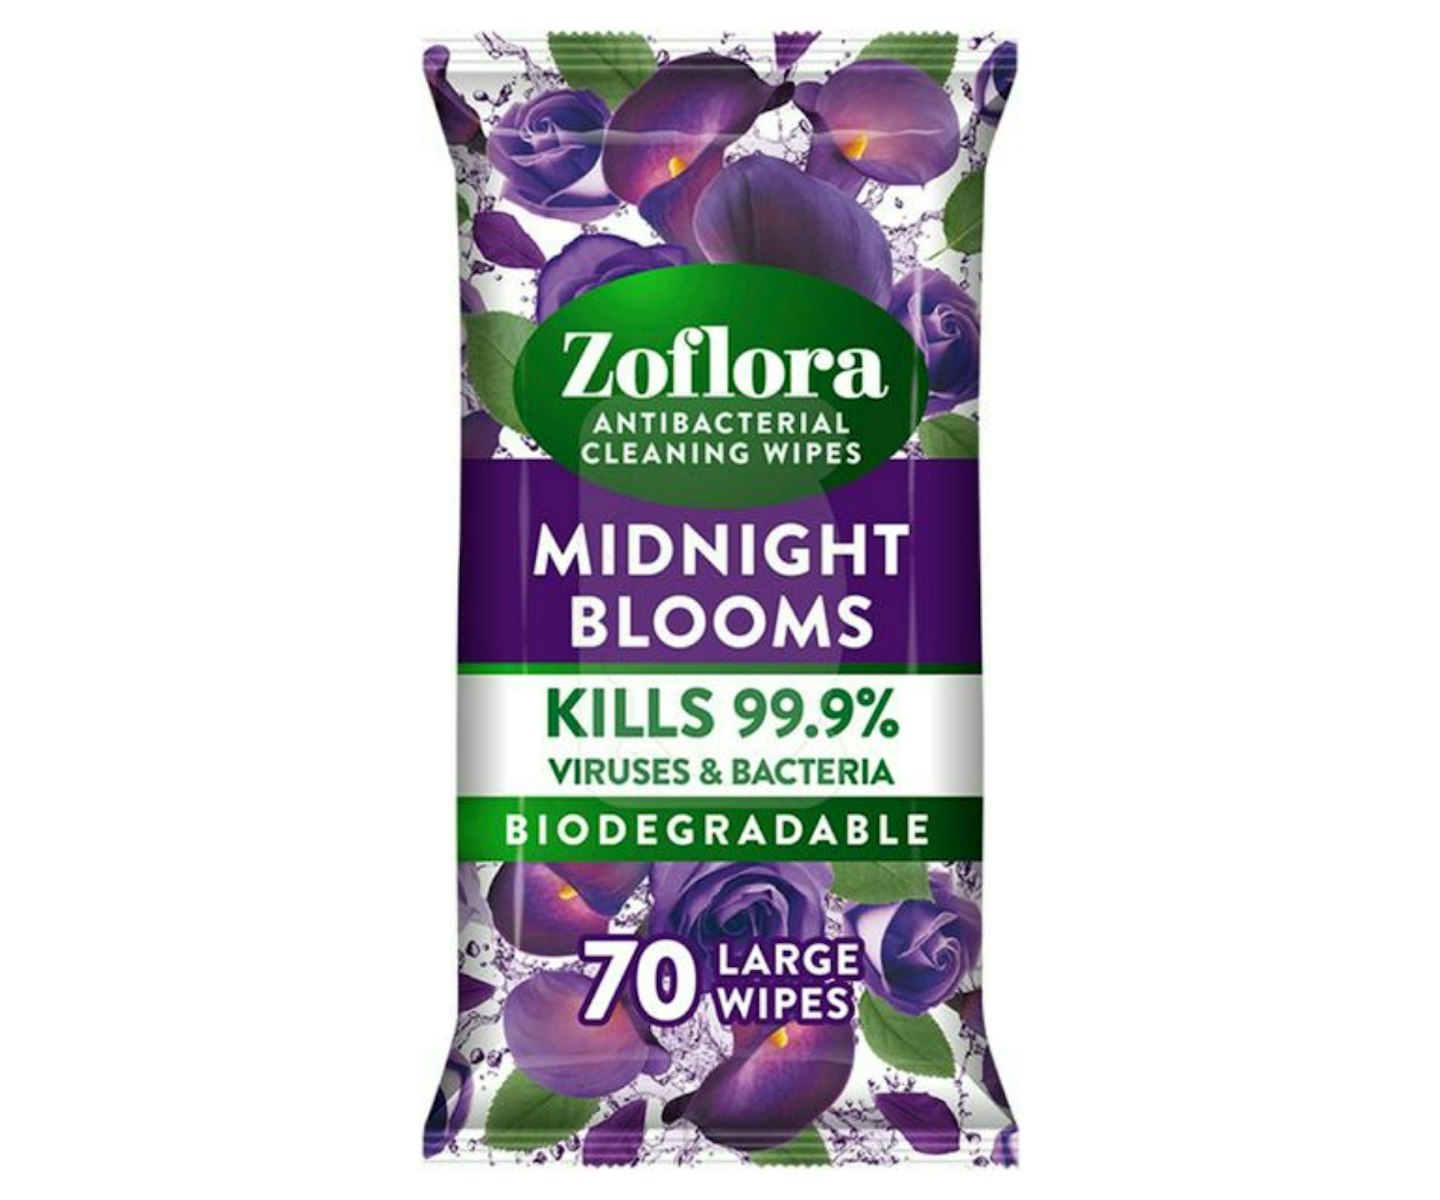 Zoflora Antibacterial Multi-Surface Cleaning Wipes Midnight Blooms 70 Large Wipes